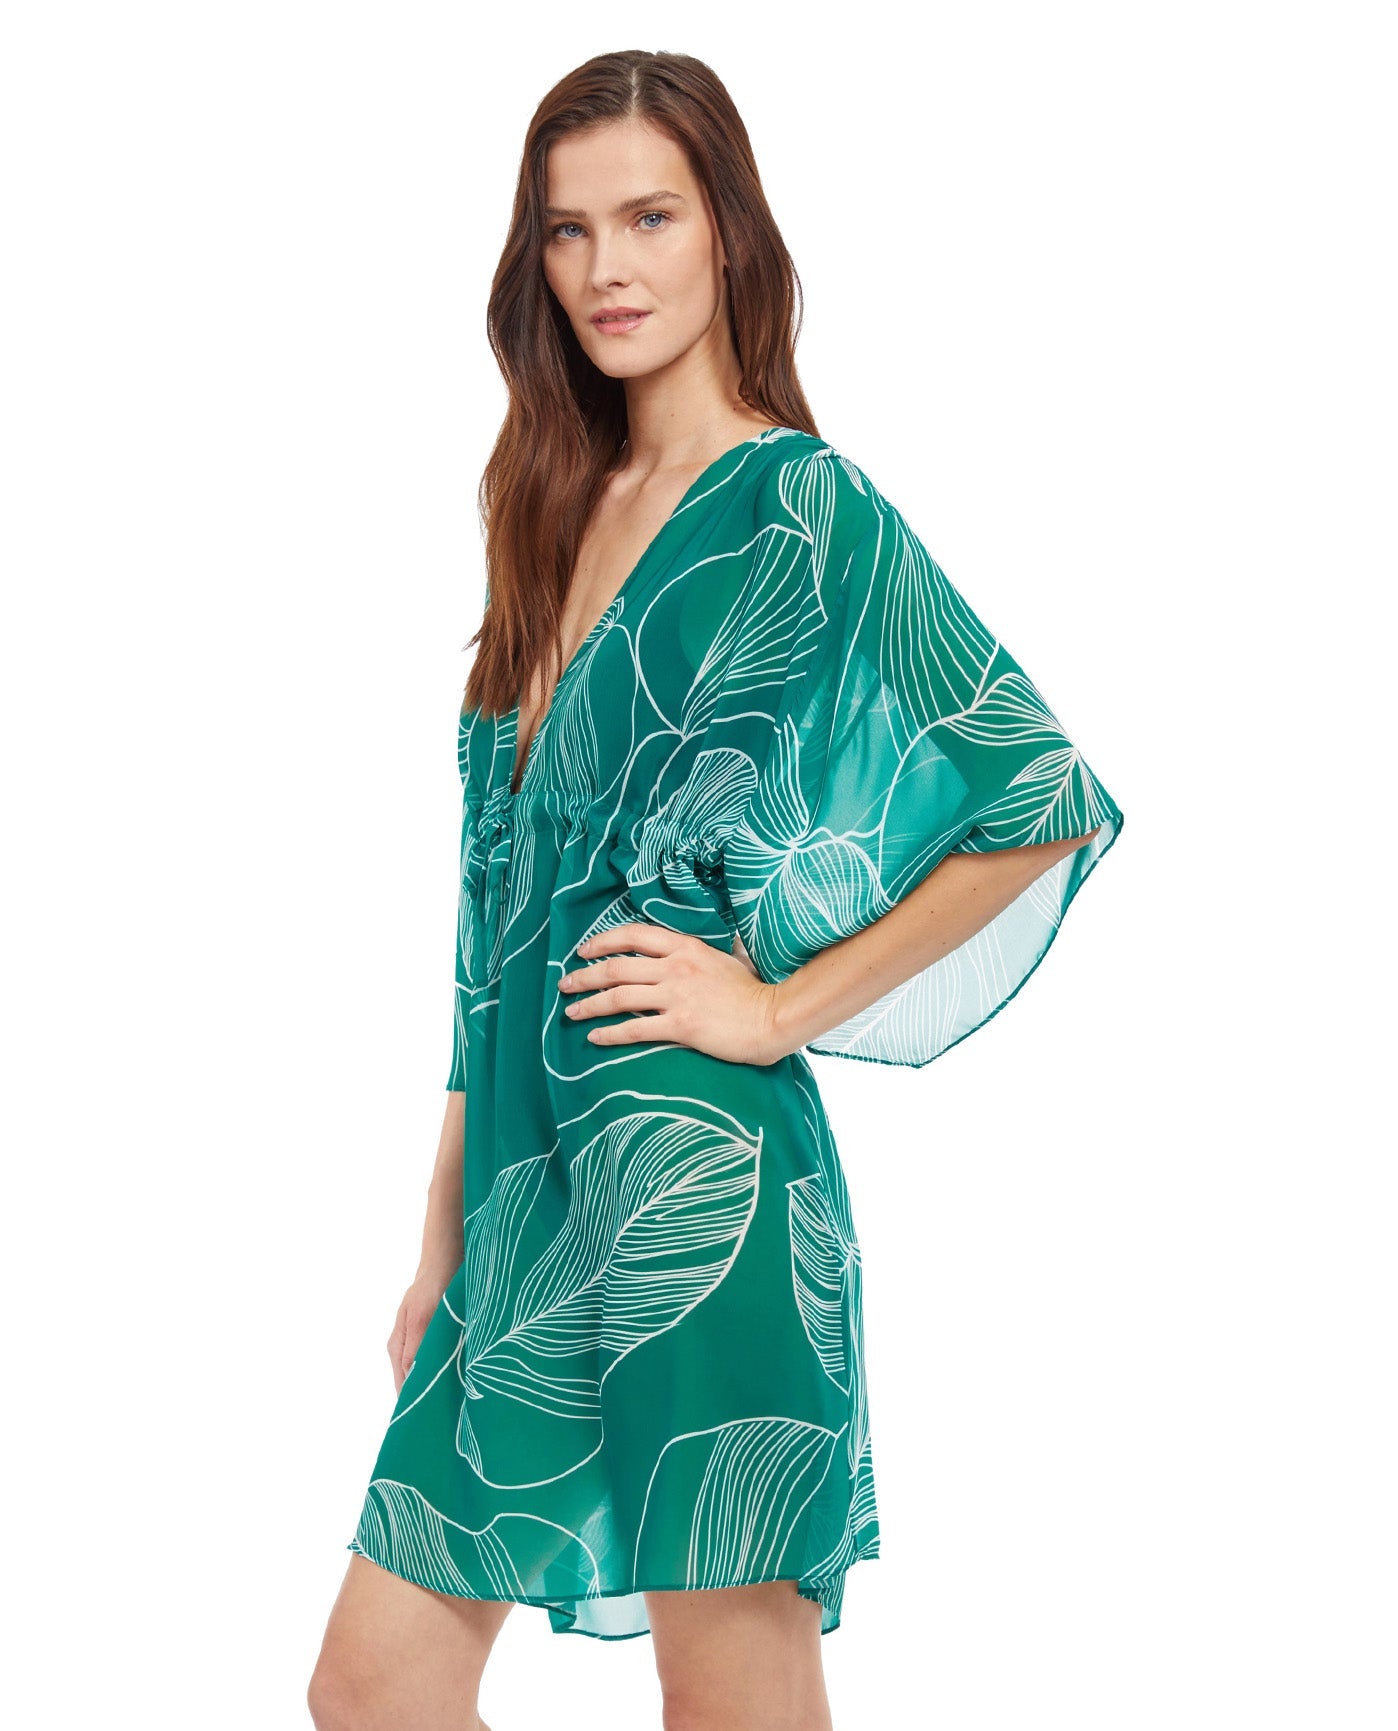 Side View View Of Gottex Natural Essence Deep V-Neck Cover Up Dress | Gottex Natural Essence Green And White